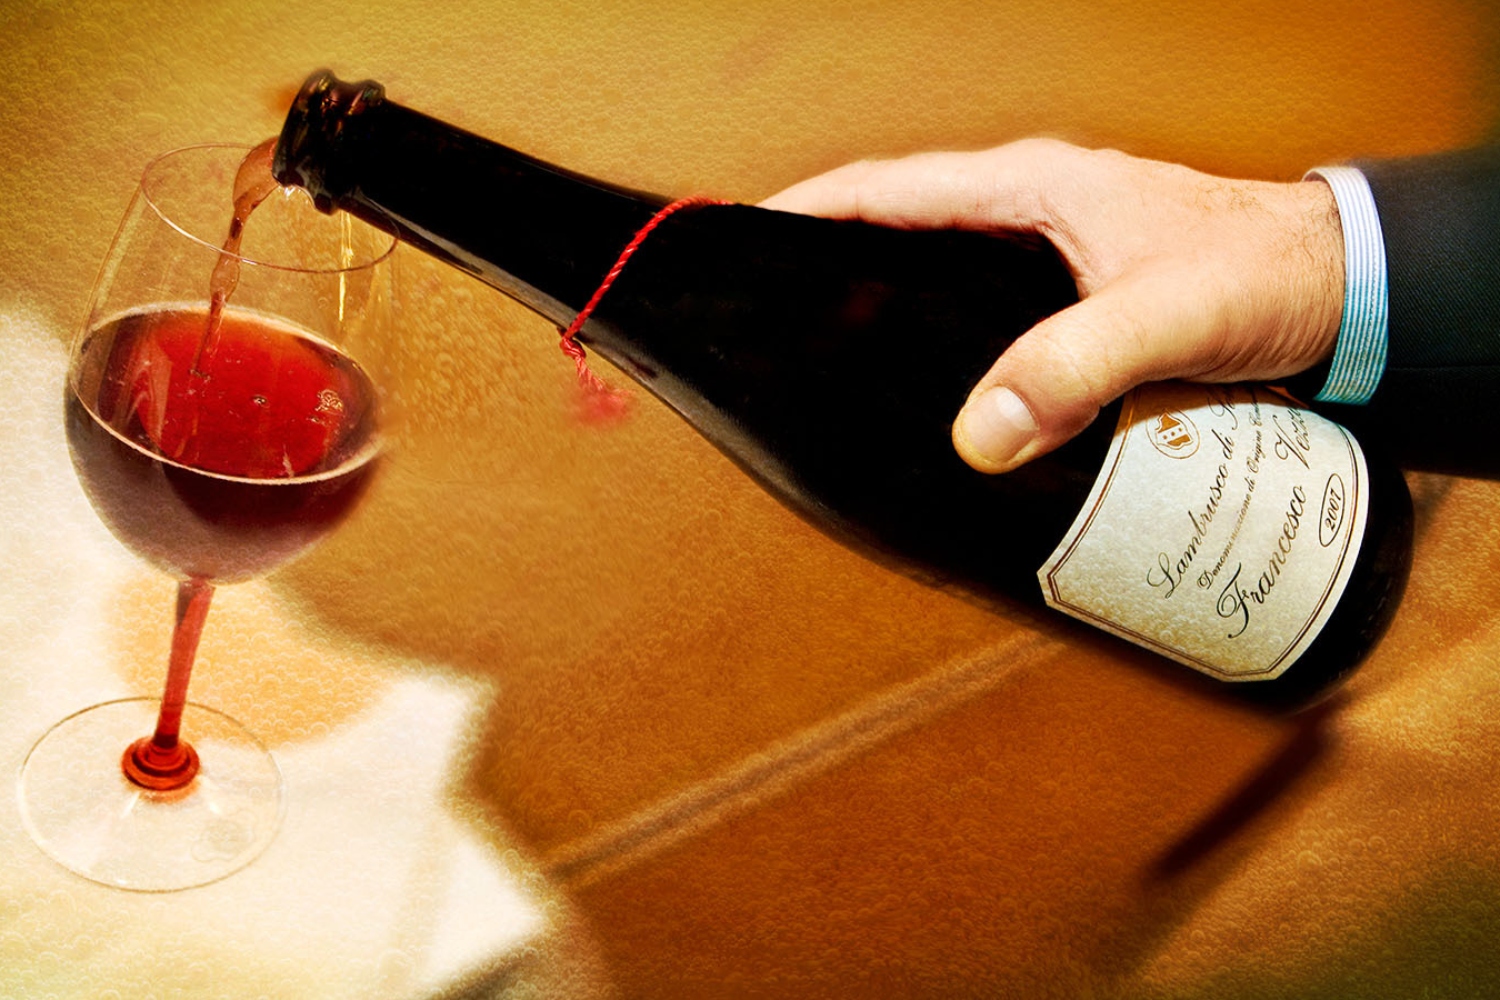 Photo shows a hand pouring a glass of red lambrusco